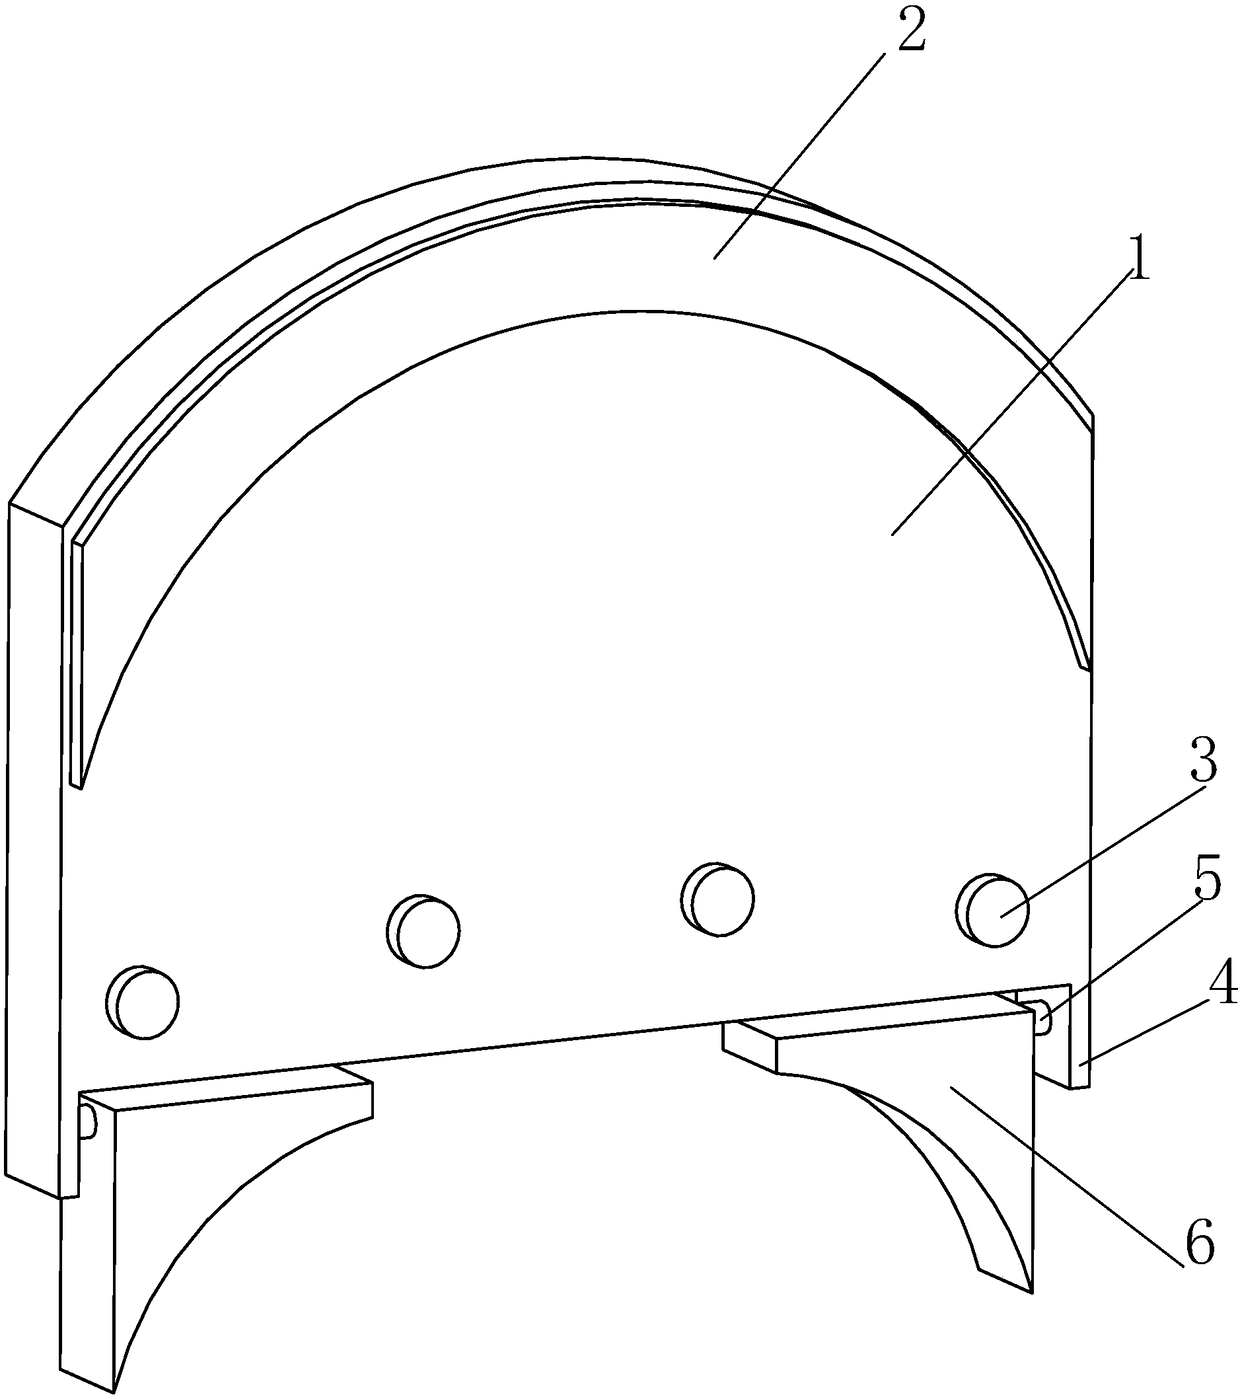 A side baffle for submerged arc welding of shaft parts